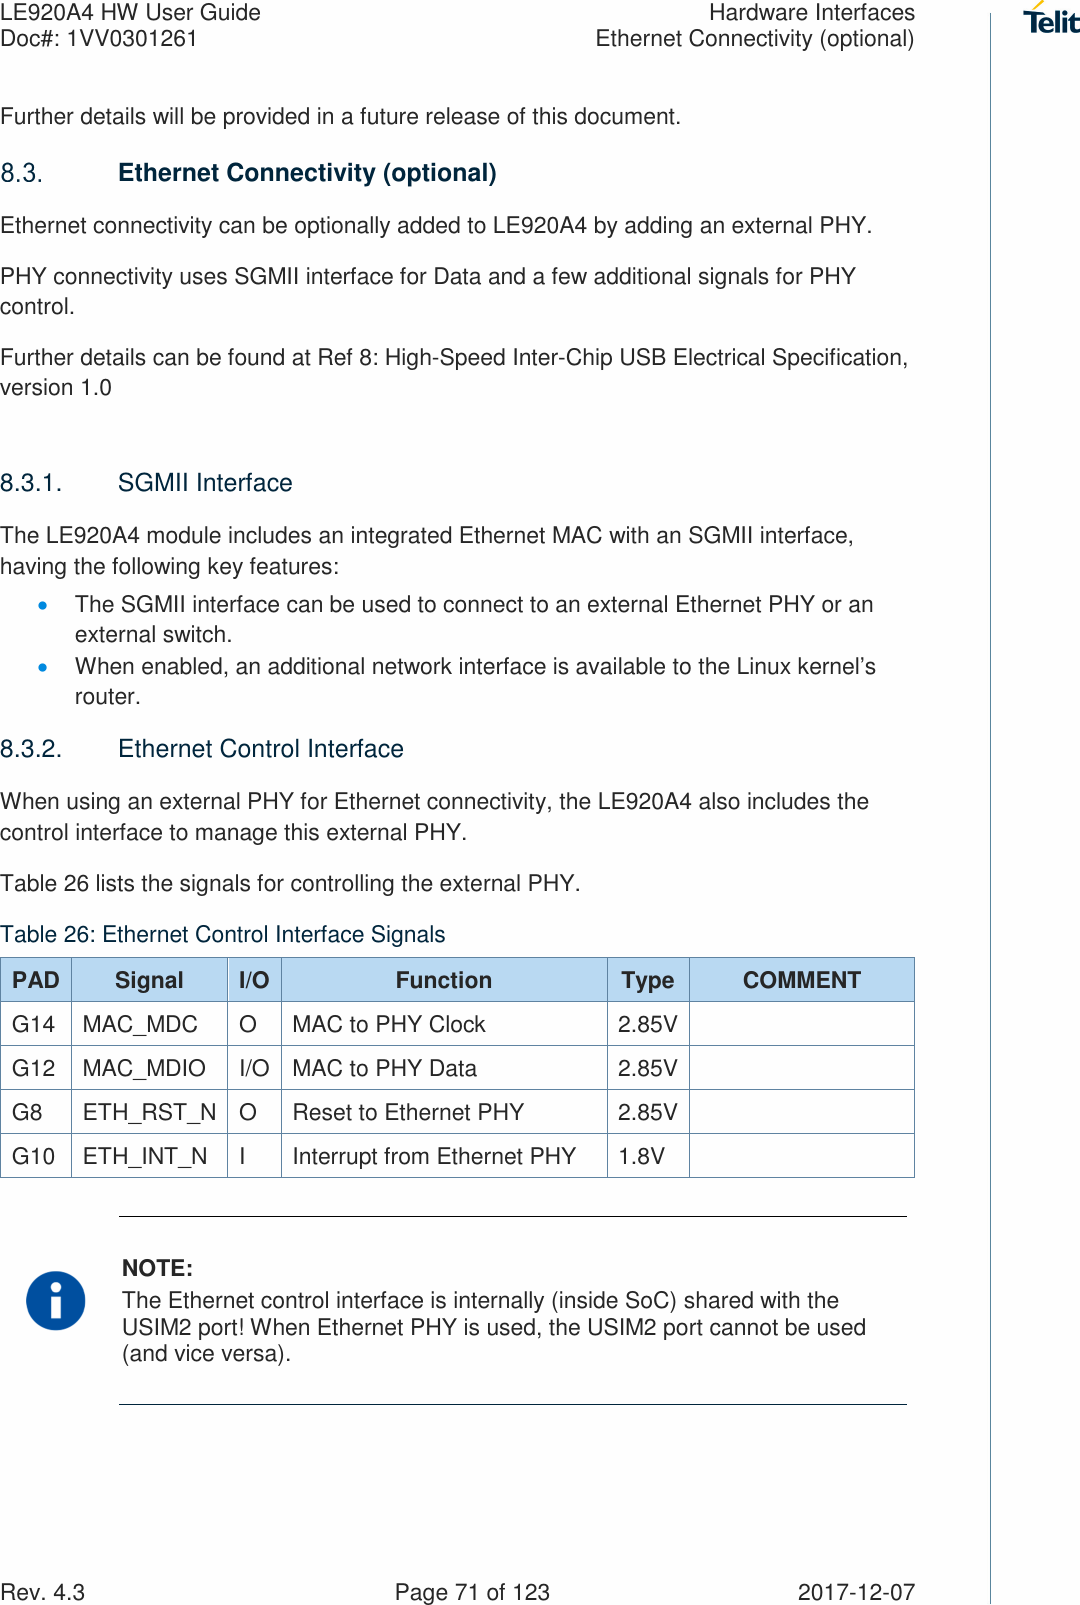 LE920A4 HW User Guide  Hardware Interfaces Doc#: 1VV0301261  Ethernet Connectivity (optional) Rev. 4.3    Page 71 of 123  2017-12-07 Further details will be provided in a future release of this document.  Ethernet Connectivity (optional) Ethernet connectivity can be optionally added to LE920A4 by adding an external PHY. PHY connectivity uses SGMII interface for Data and a few additional signals for PHY control. Further details can be found at Ref 8: High-Speed Inter-Chip USB Electrical Specification, version 1.0  8.3.1.  SGMII Interface The LE920A4 module includes an integrated Ethernet MAC with an SGMII interface, having the following key features: • The SGMII interface can be used to connect to an external Ethernet PHY or an external switch. • When enabled, an additional network interface is available to the Linux kernel’s router. 8.3.2.  Ethernet Control Interface When using an external PHY for Ethernet connectivity, the LE920A4 also includes the control interface to manage this external PHY. Table 26 lists the signals for controlling the external PHY. Table 26: Ethernet Control Interface Signals PAD Signal  I/O Function  Type  COMMENT G14  MAC_MDC  O  MAC to PHY Clock  2.85V  G12  MAC_MDIO  I/O MAC to PHY Data  2.85V  G8  ETH_RST_N O  Reset to Ethernet PHY  2.85V  G10  ETH_INT_N  I  Interrupt from Ethernet PHY  1.8V    NOTE: The Ethernet control interface is internally (inside SoC) shared with the USIM2 port! When Ethernet PHY is used, the USIM2 port cannot be used (and vice versa). 